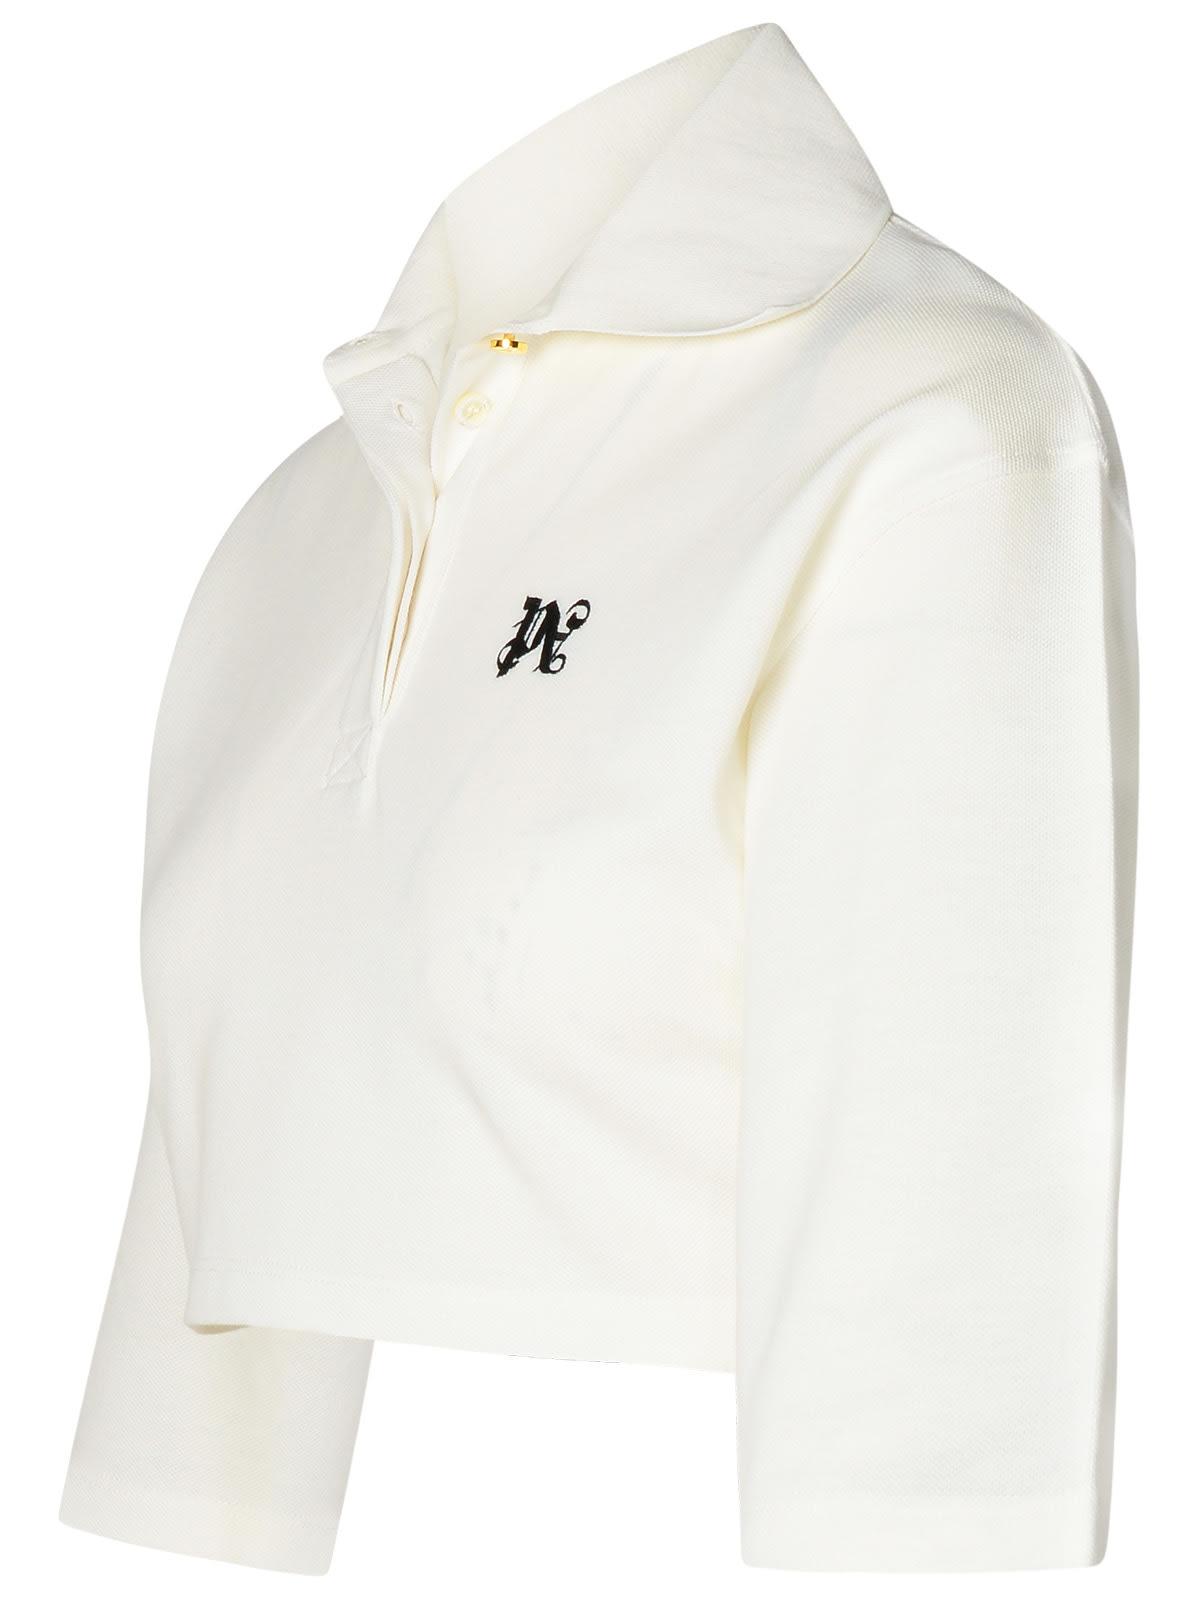 Shop Palm Angels Crop Polo Shirt In White Cotton